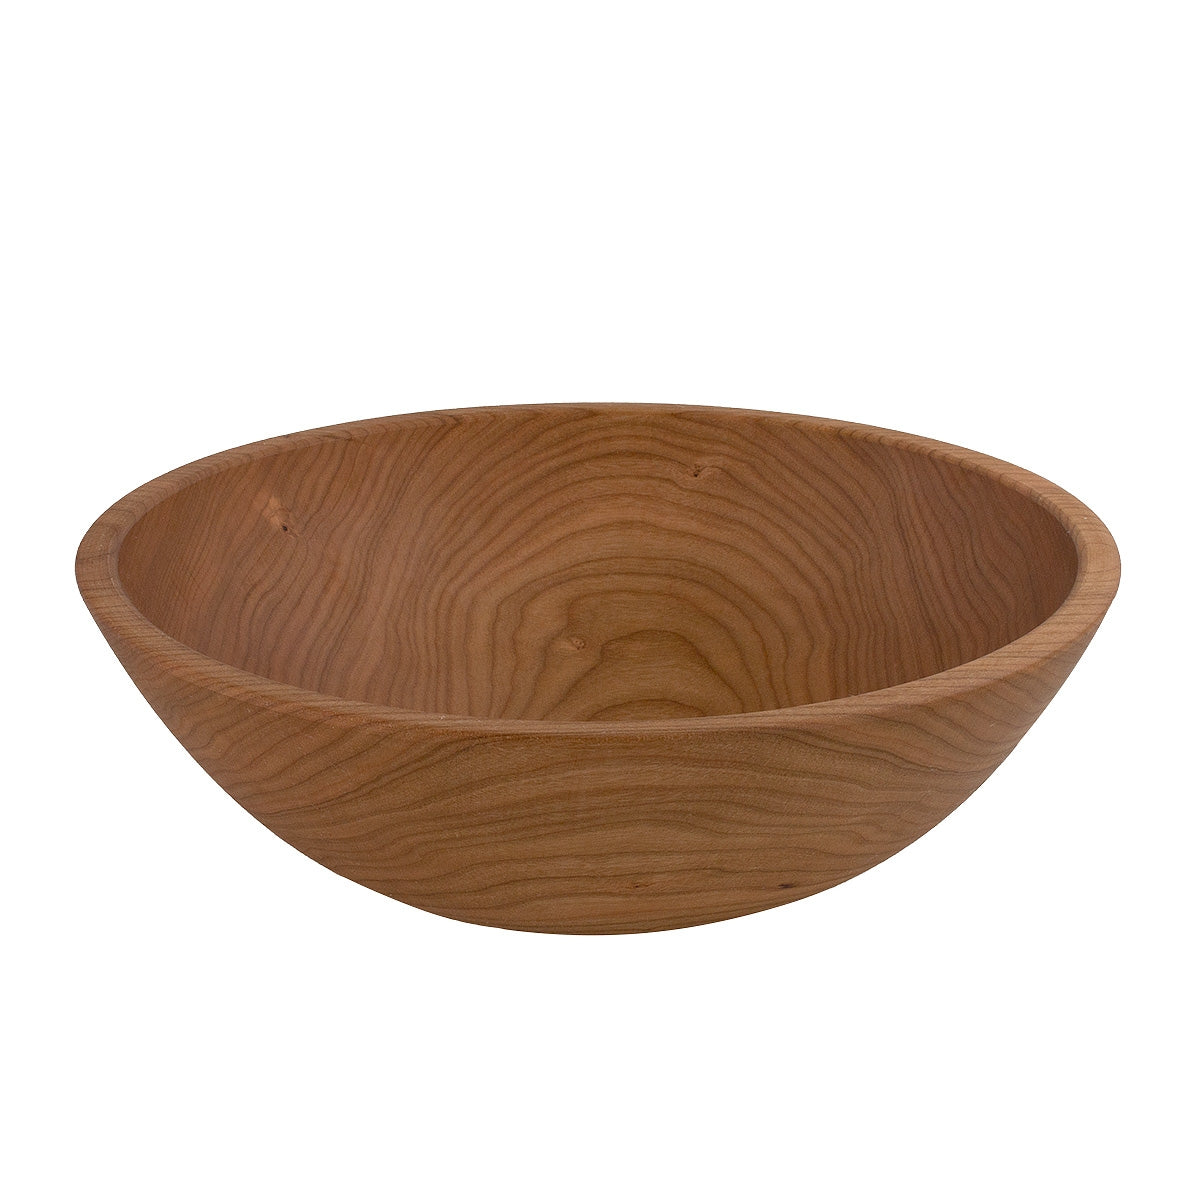 10" Cherry Wood Thick Rim Bowl Hand Crafted In Michigan